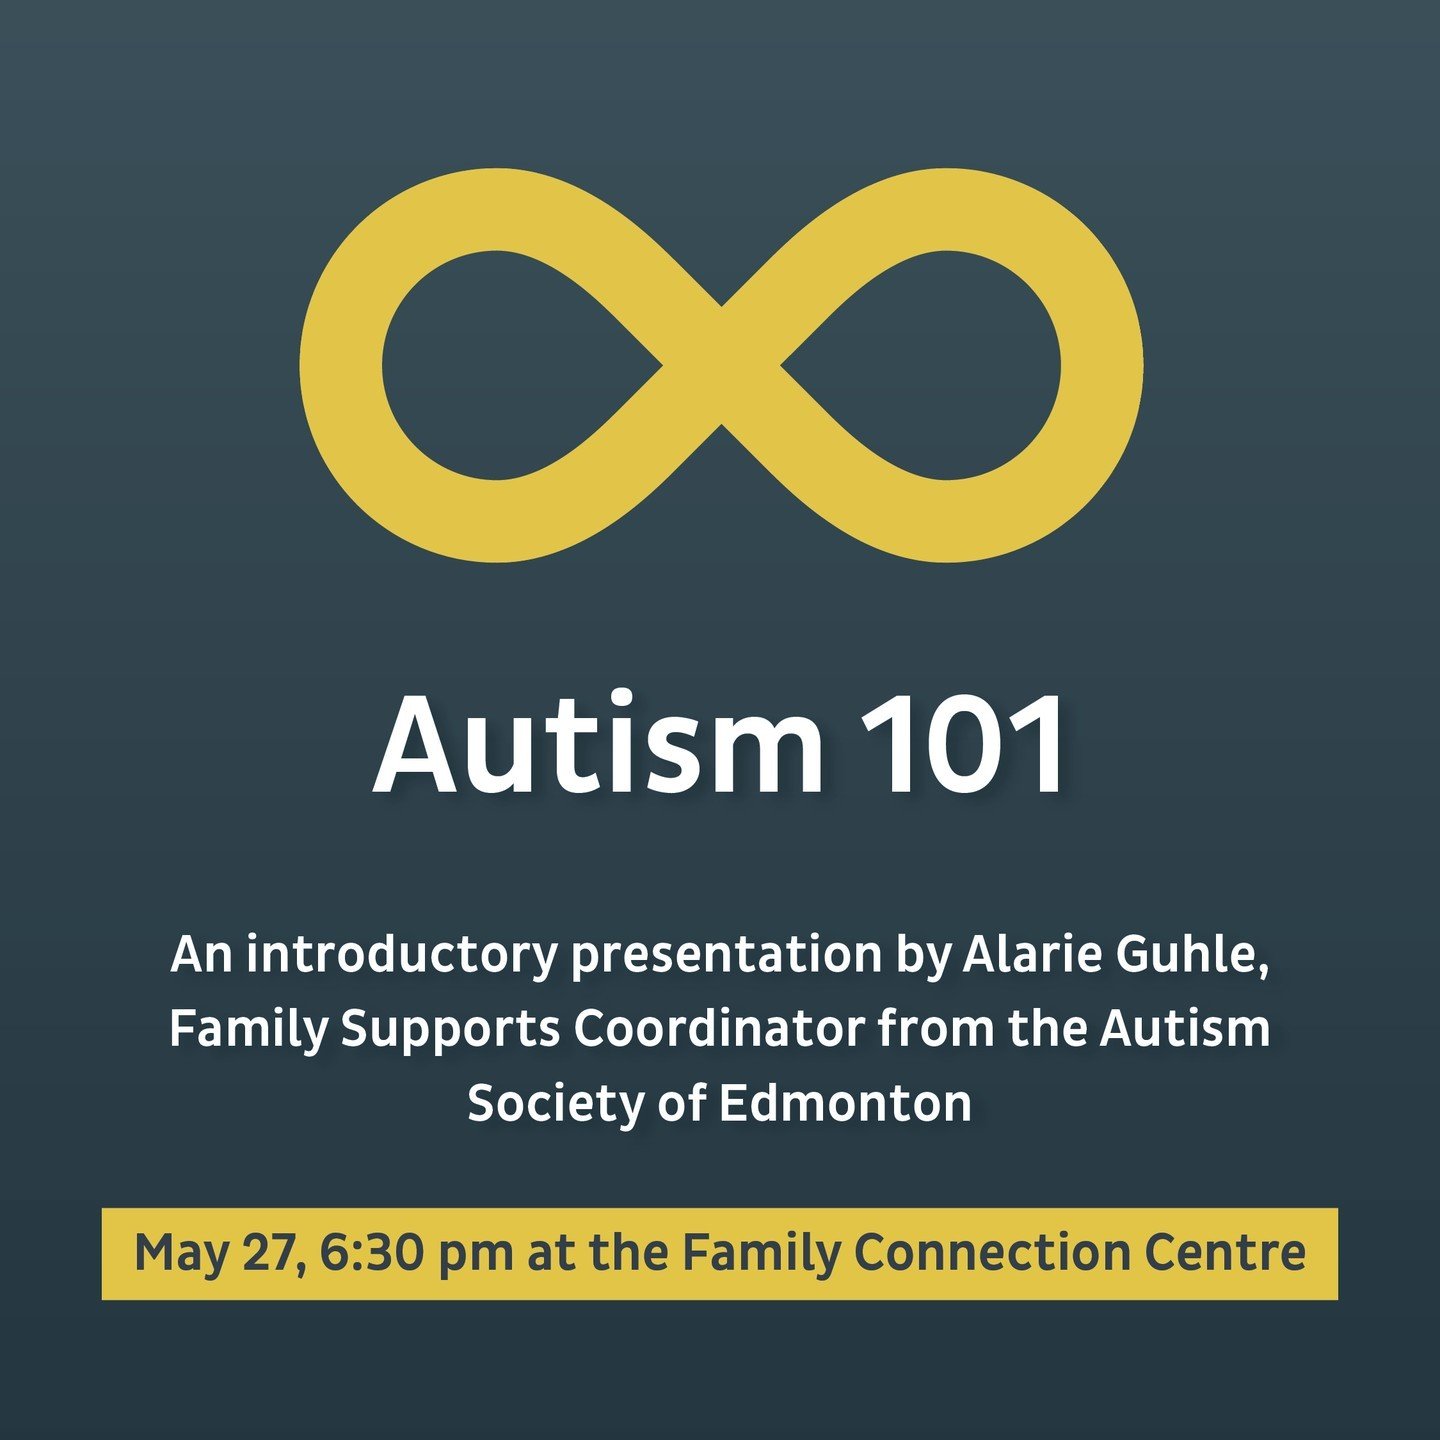 Autism 101 is a presentation by Alarie Guhle, Family Supports Coordinator from the Autism Society of Edmonton. ♾️ 🌟 

May 27, 6:30pm MDT at the Family Connection Centre.

The presentation offers an introductory overview of autism and neurodiversity 